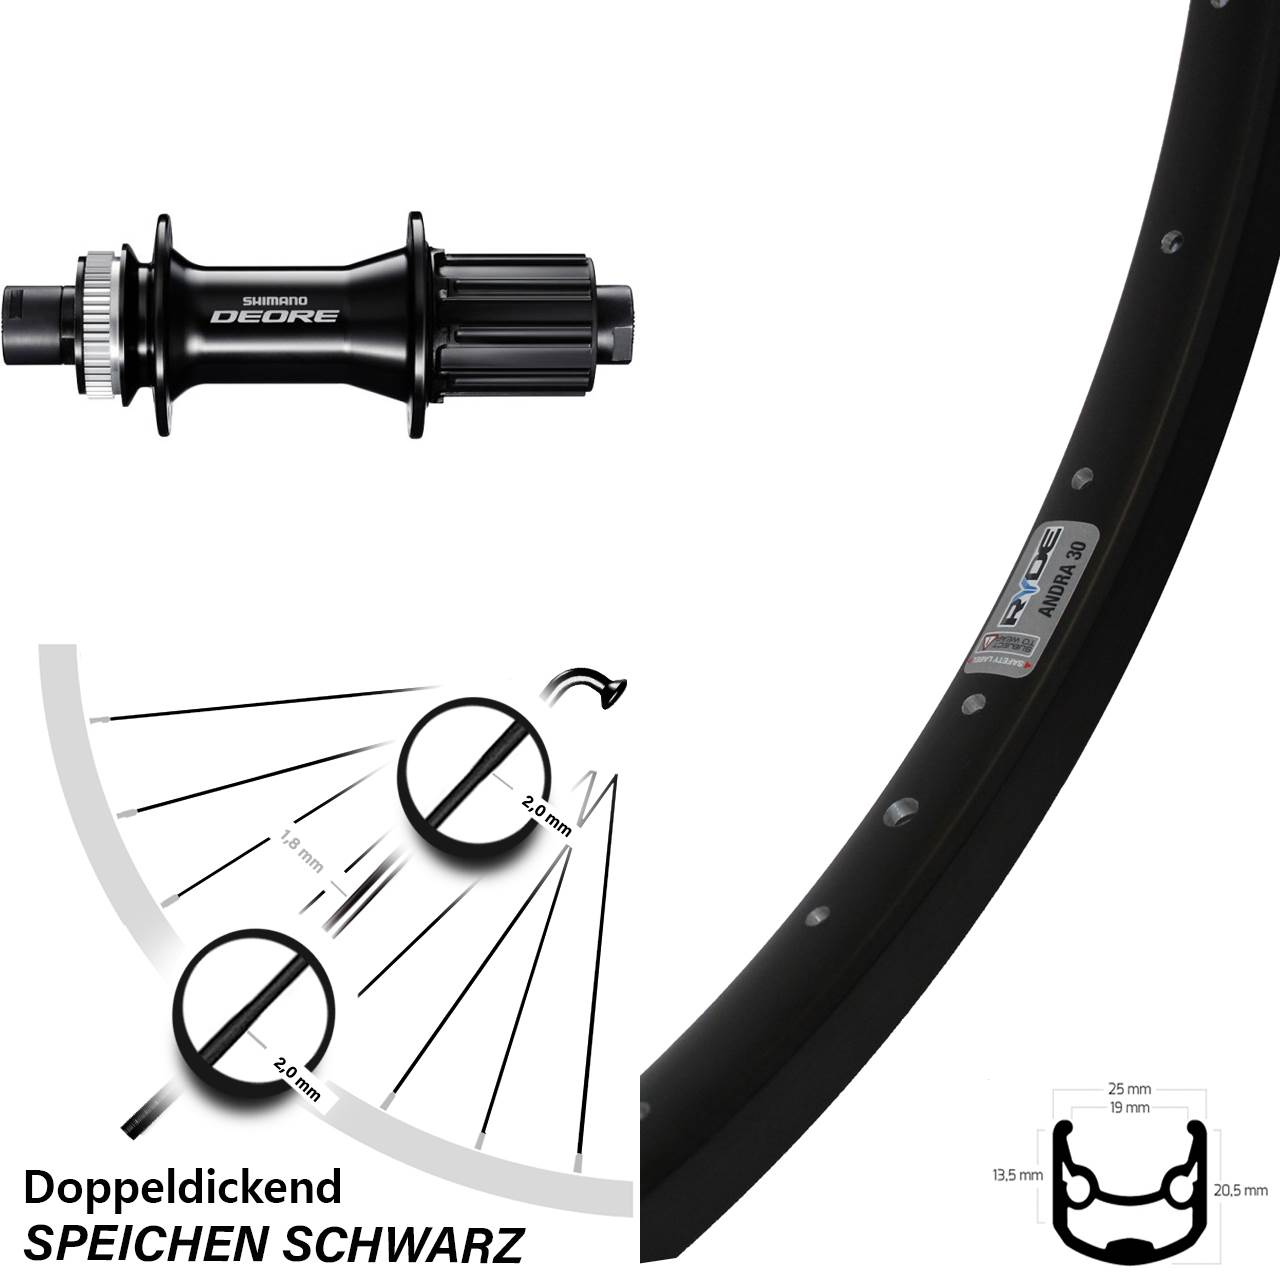 28 Zoll Hinterad Ryde Andra 30 Disc mit Shimano Deore FH-M6010 Nabe